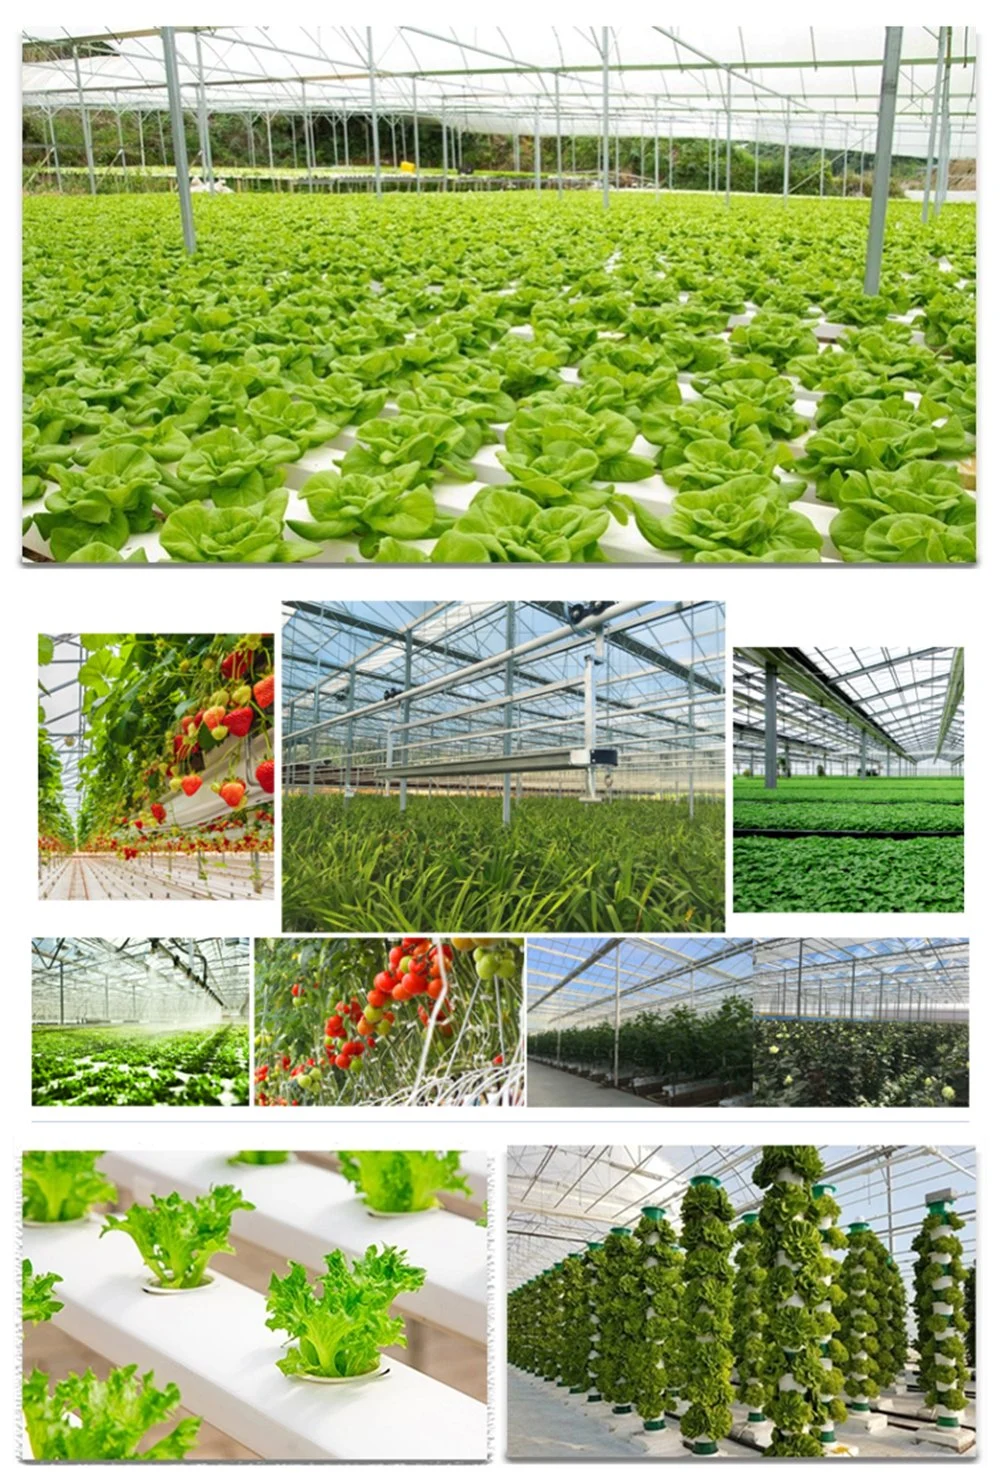 Made in China Prefabricated/Ready Venlo/Gothic Greenhouse for Hydroponic Growing Cucumber/Flower/Tomato